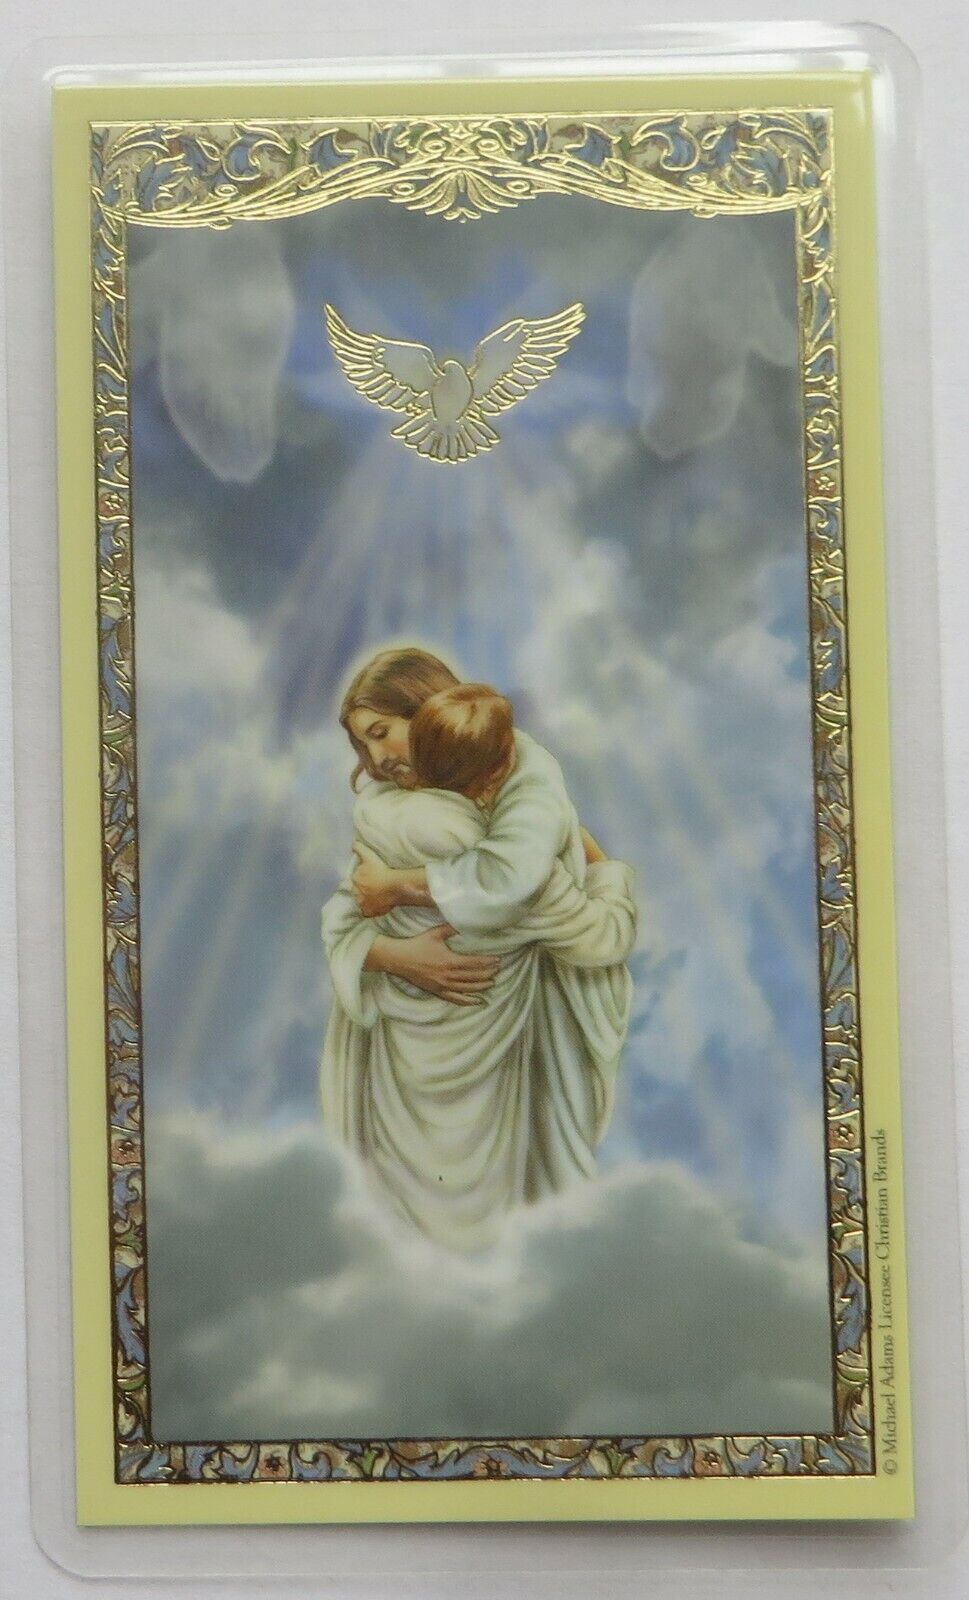 Safely Home - Laminated Holy Card